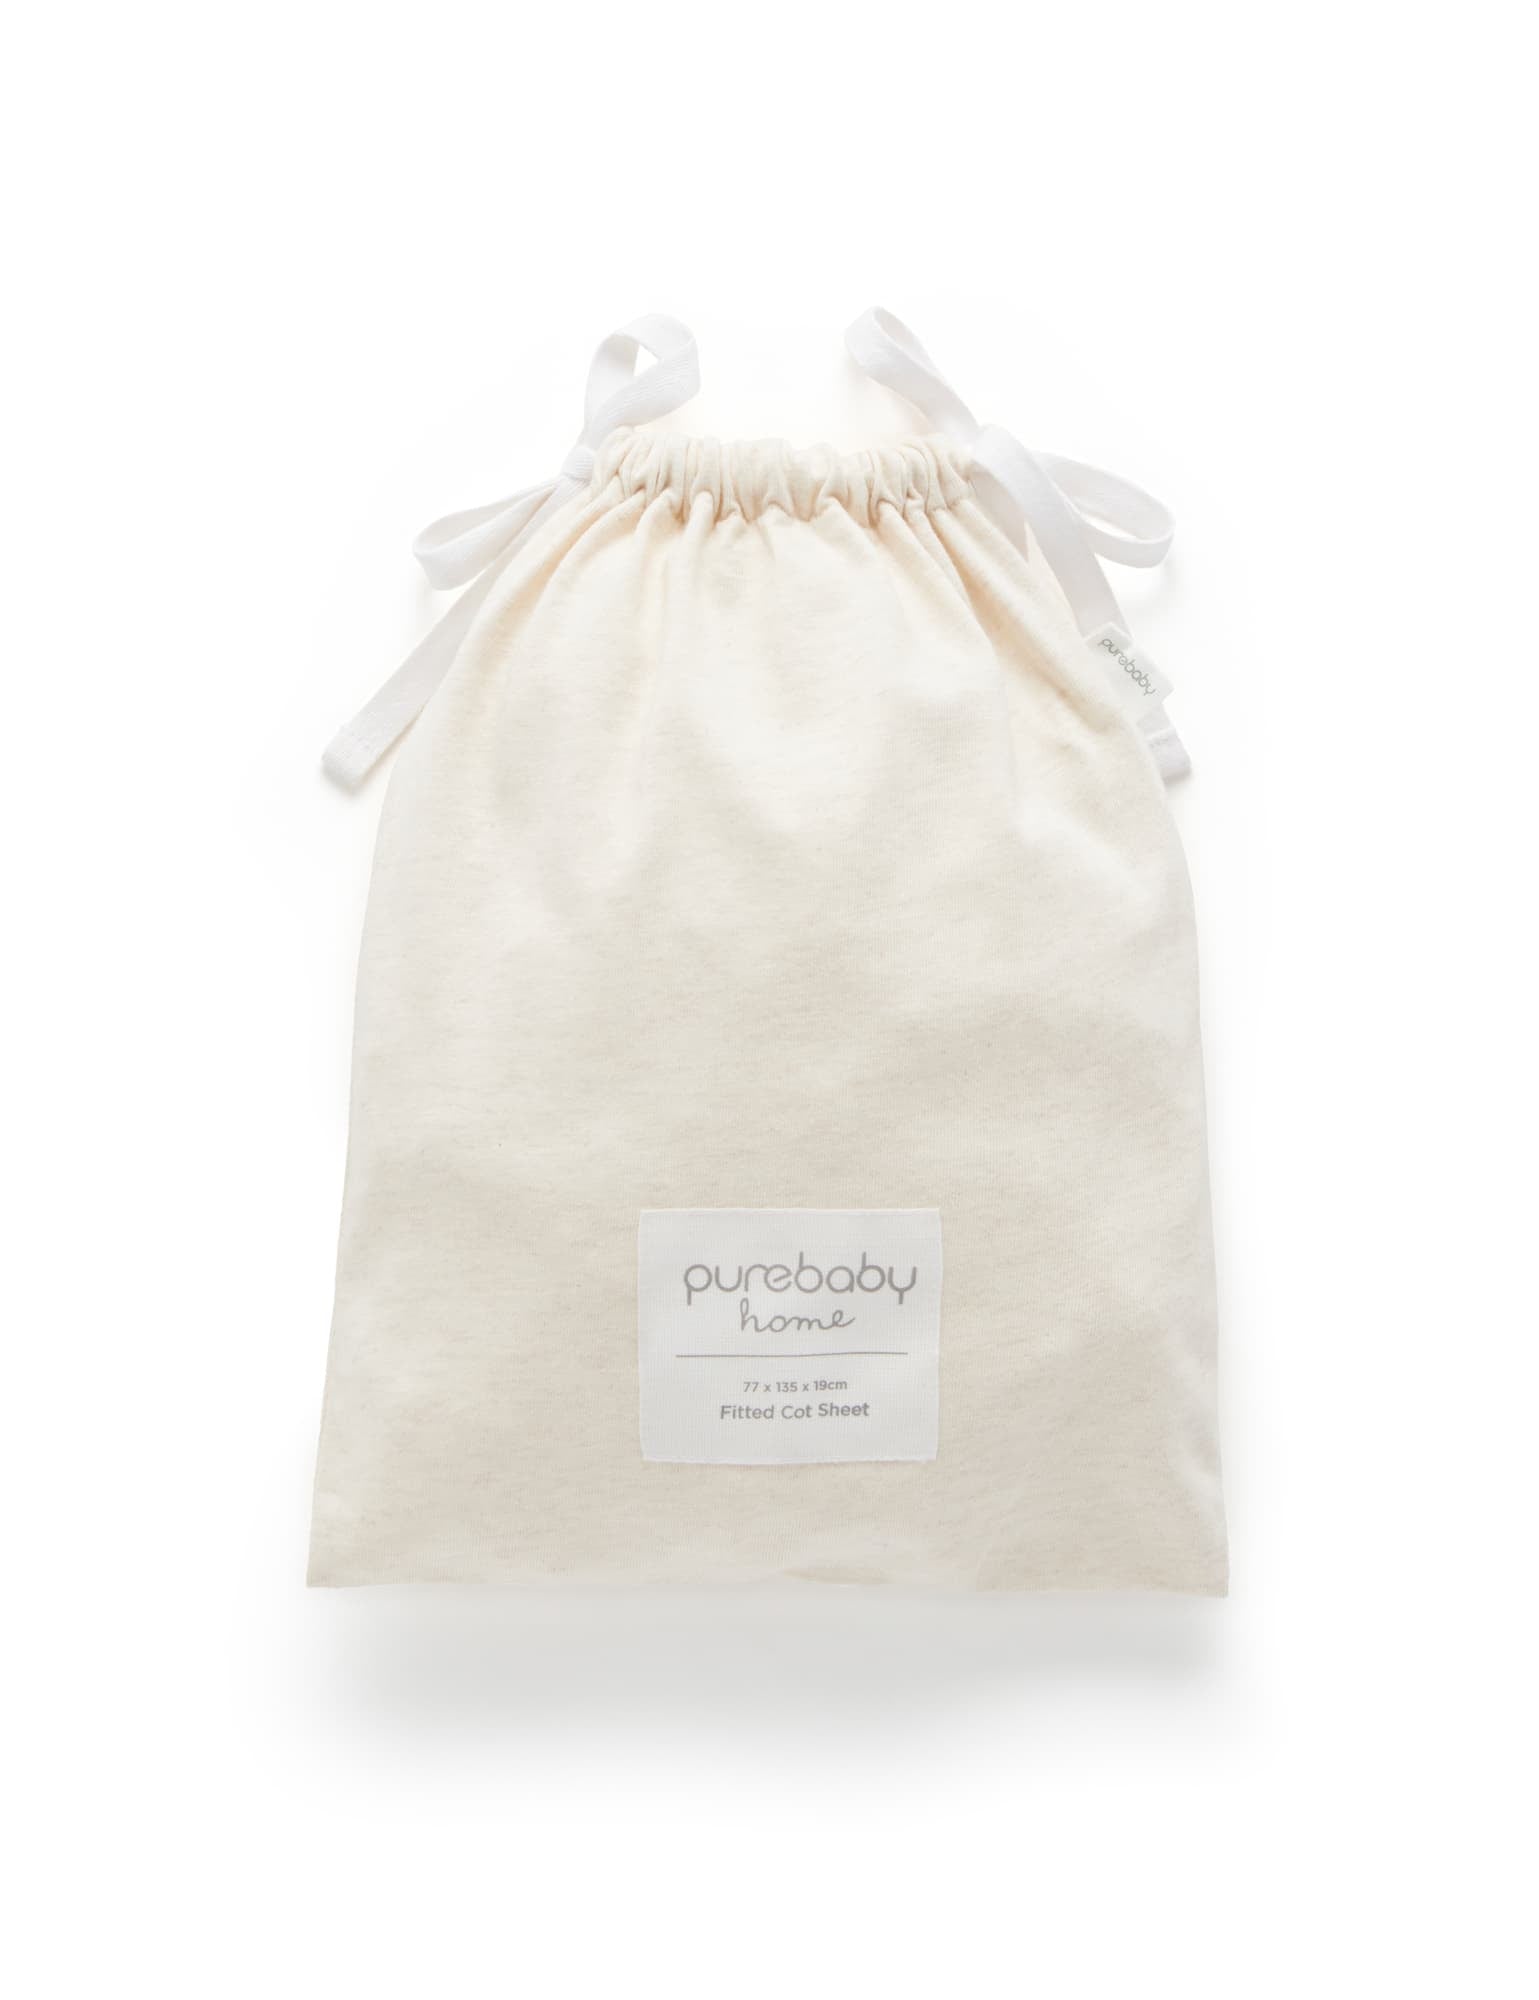 Jersey Fitted Cot Sheet - Wheat melange - Purebaby